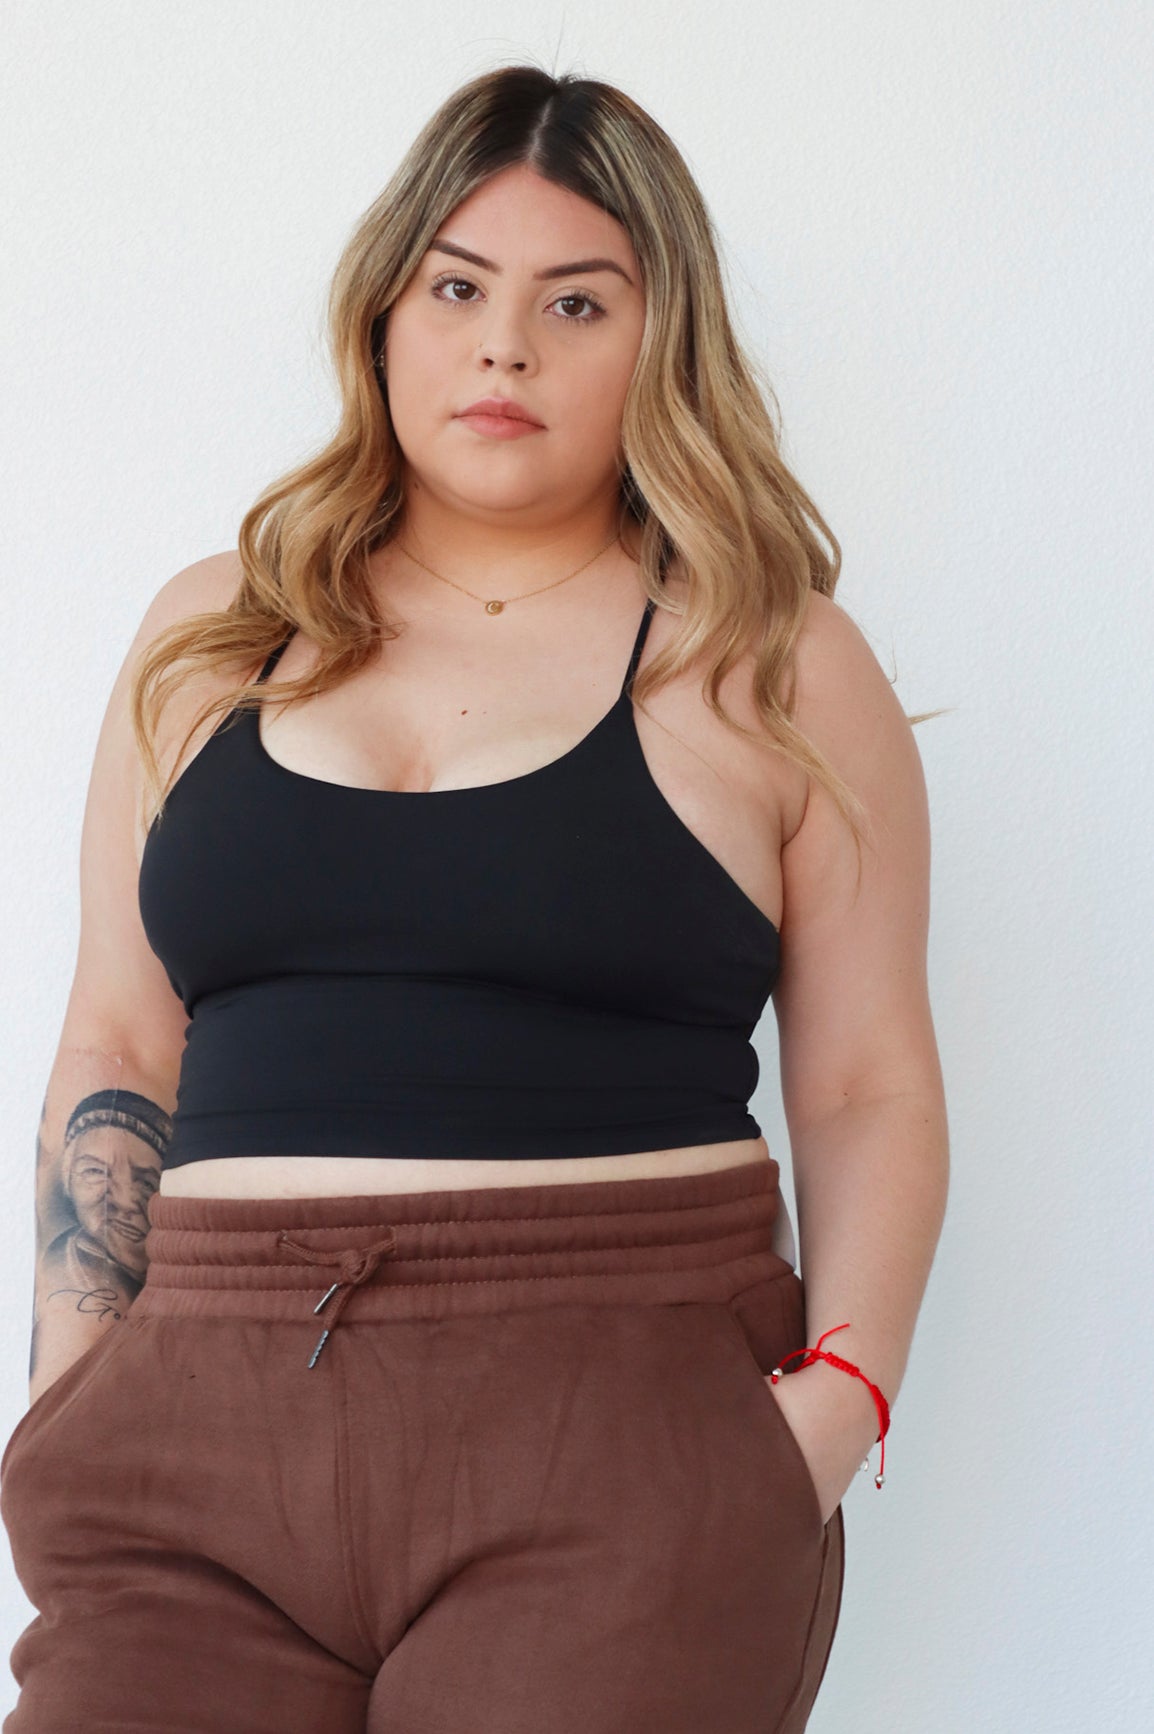 female model that is 5'1" wearing a size 2xl black athletic tank top with padding